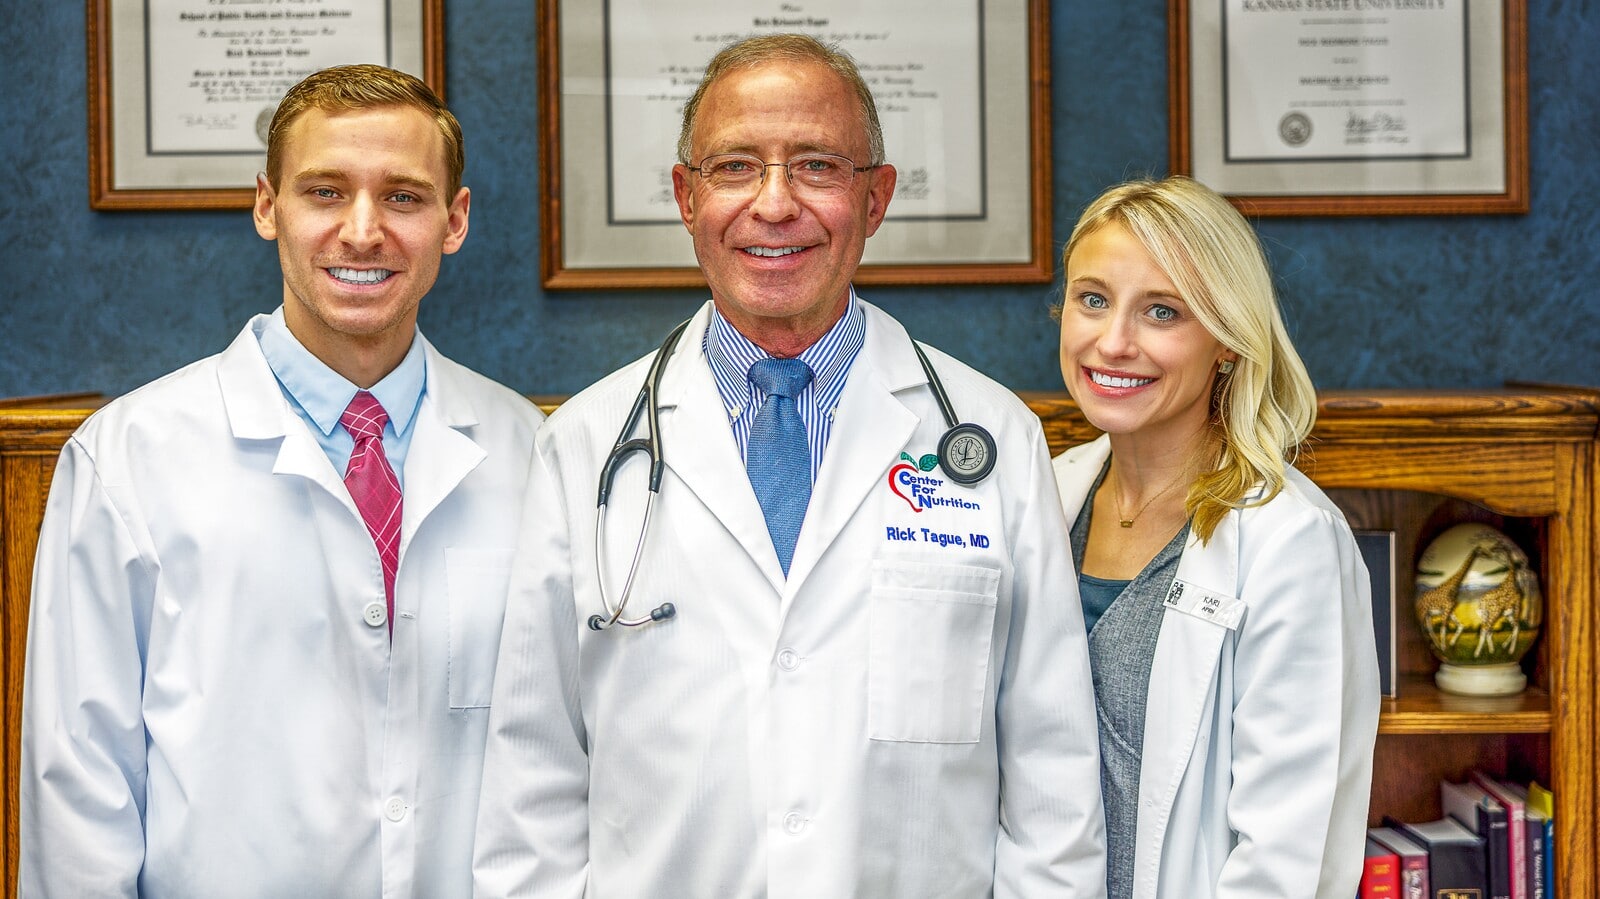 Obtaining Optimum Health DR. TAGUE’S CENTER FOR NUTRITION CELEBRATES 25 YEARS!